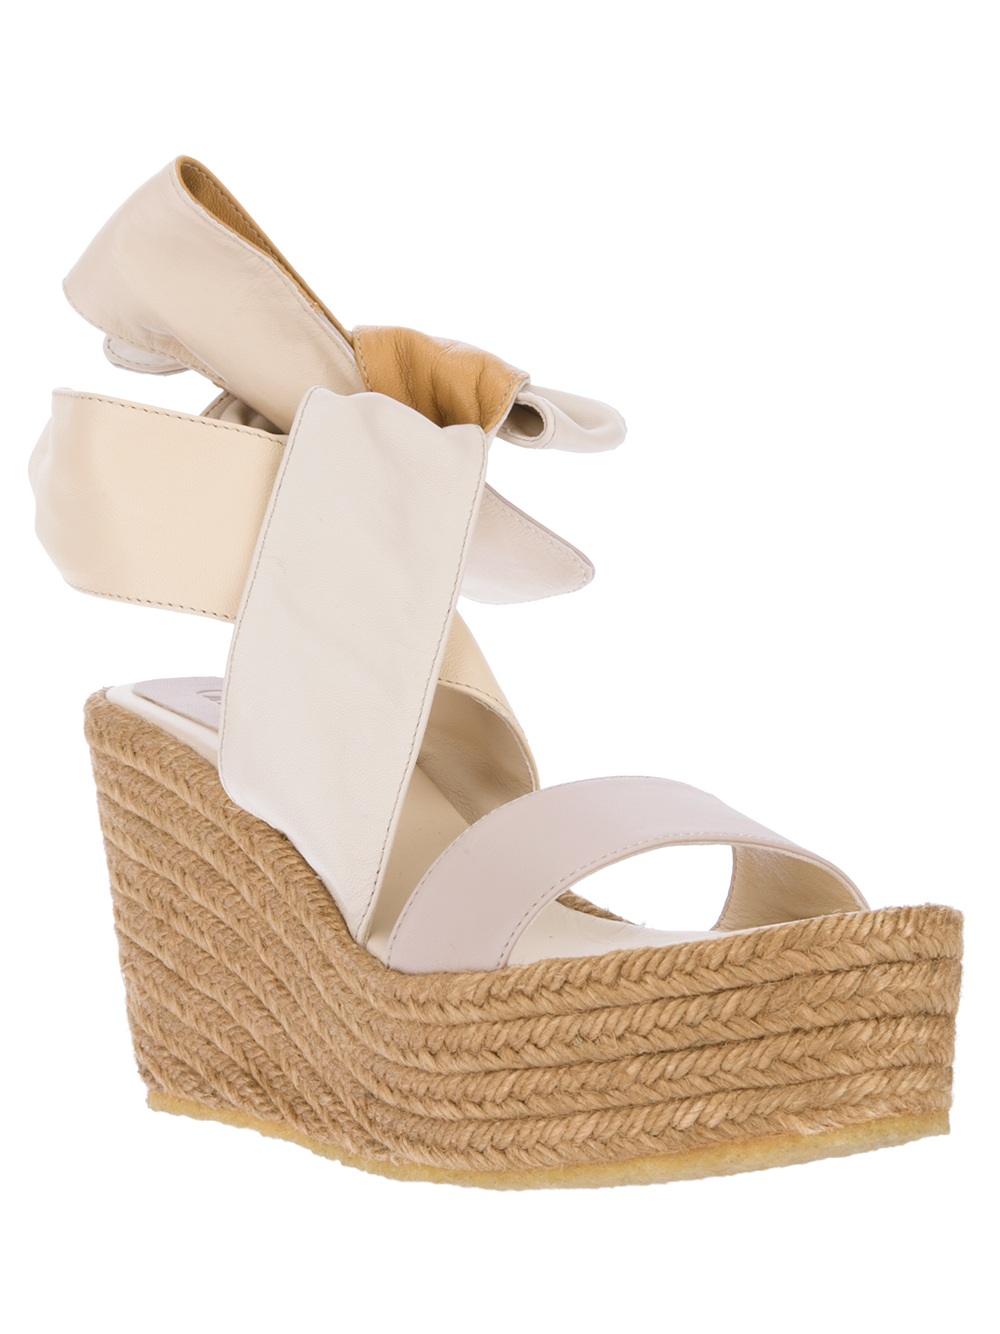 Lyst - Chloé Wedge Espadrilles in Natural